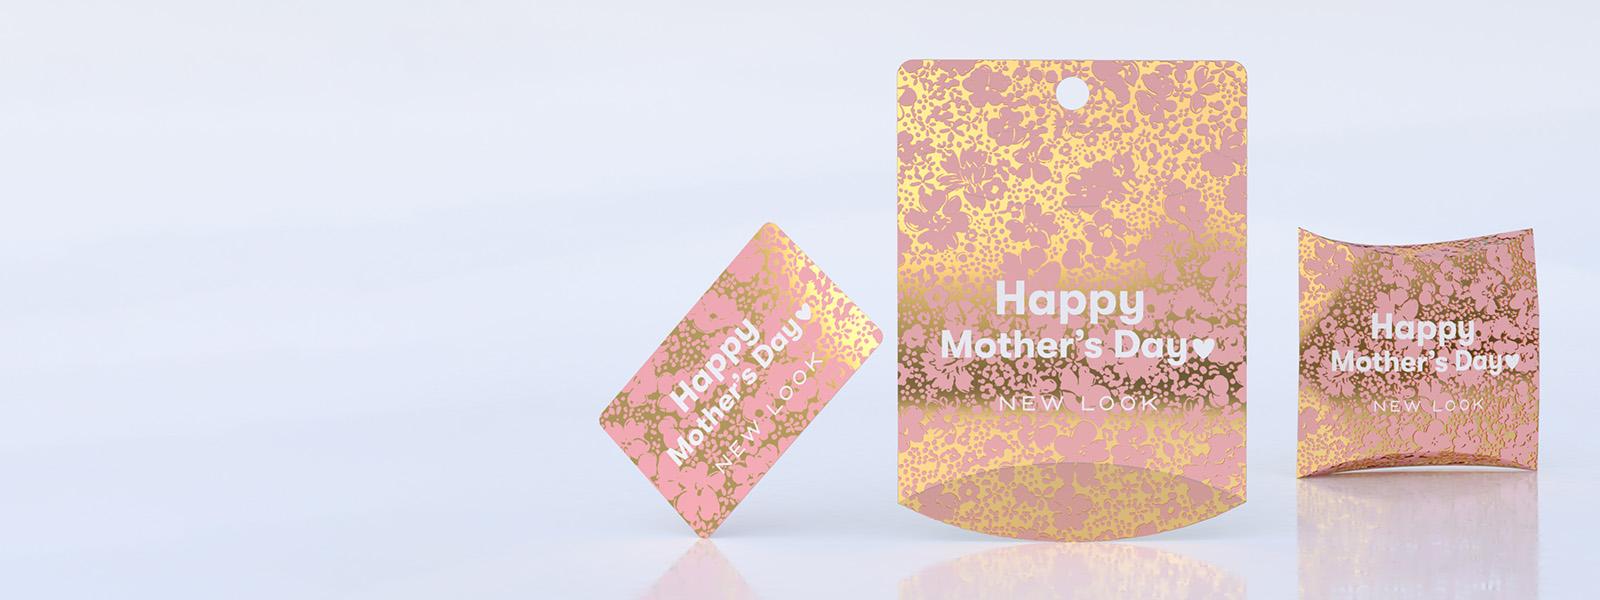 Priory Shopping Centre - New Look has a treat for your Mum and a treat for  you. Spend £25 or more on a gift card for Mother's Day and you will receive